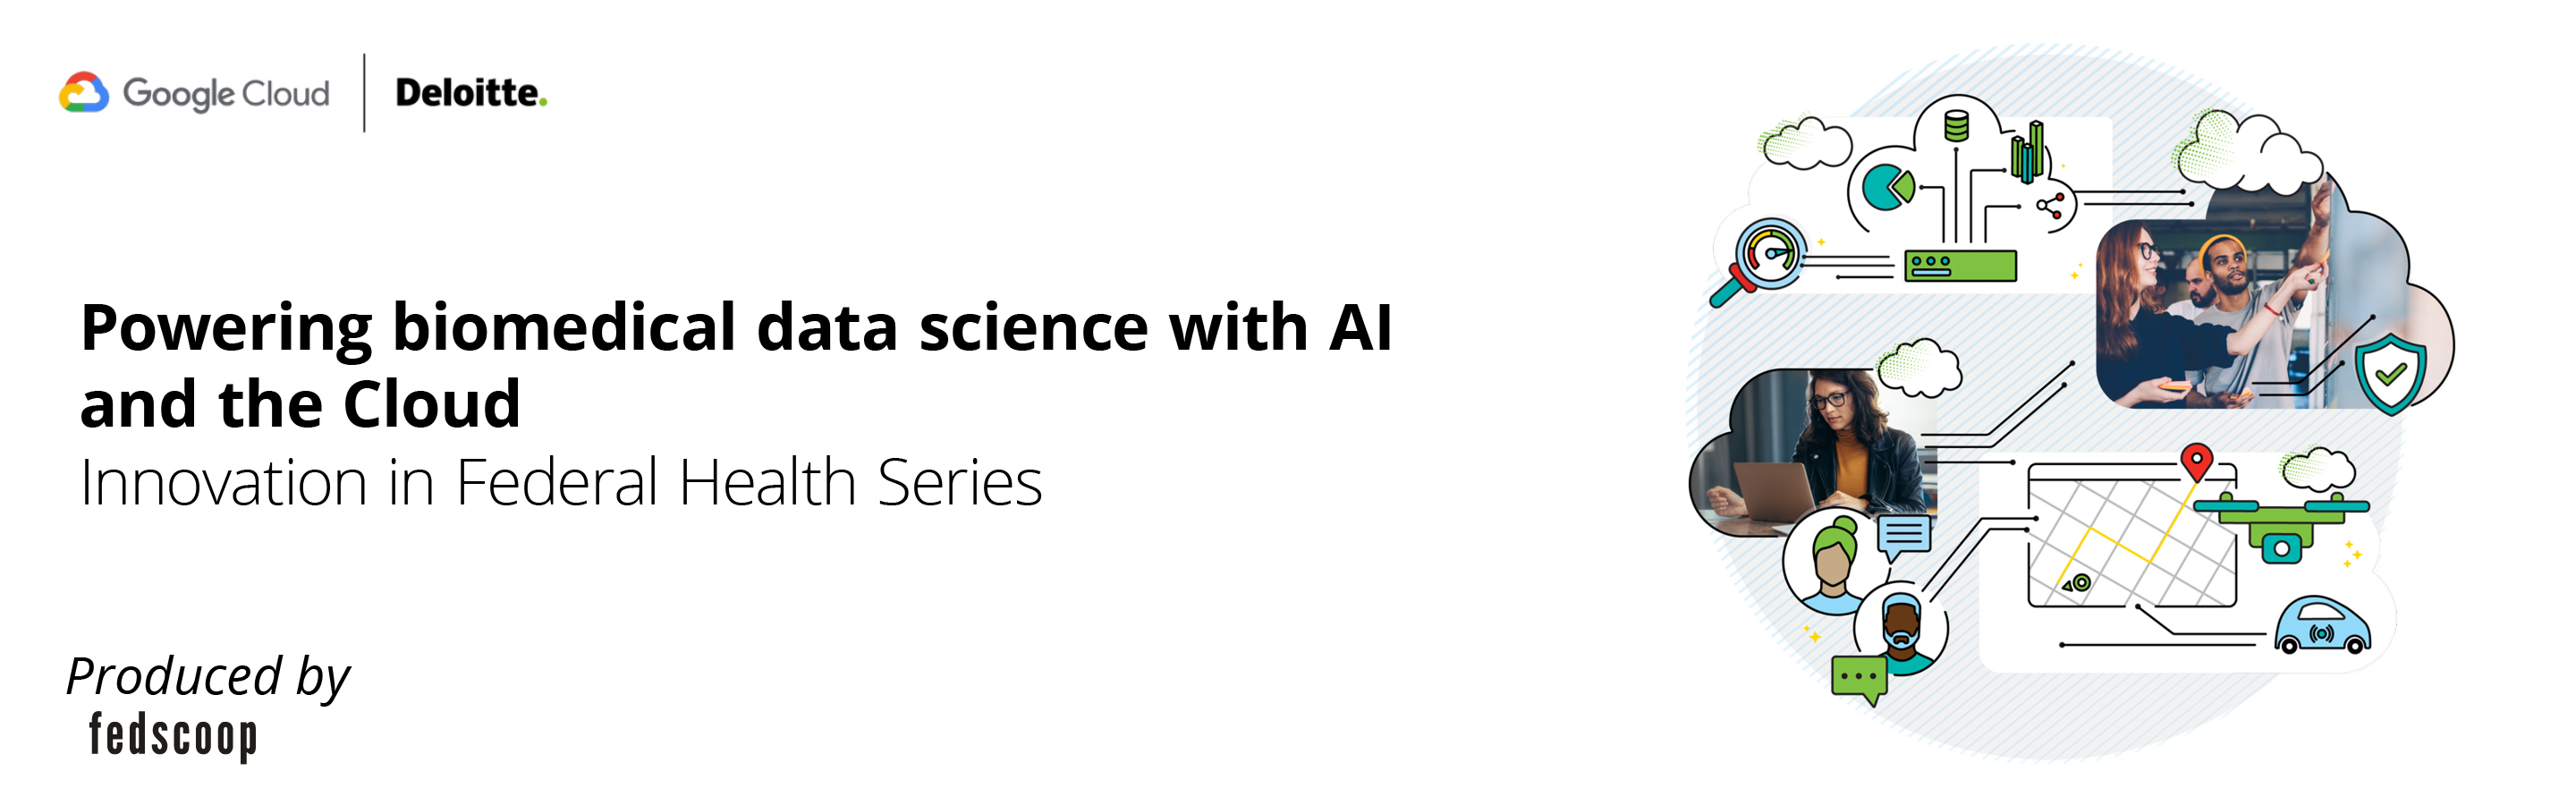 Powering biomedical data science with AI and the cloud